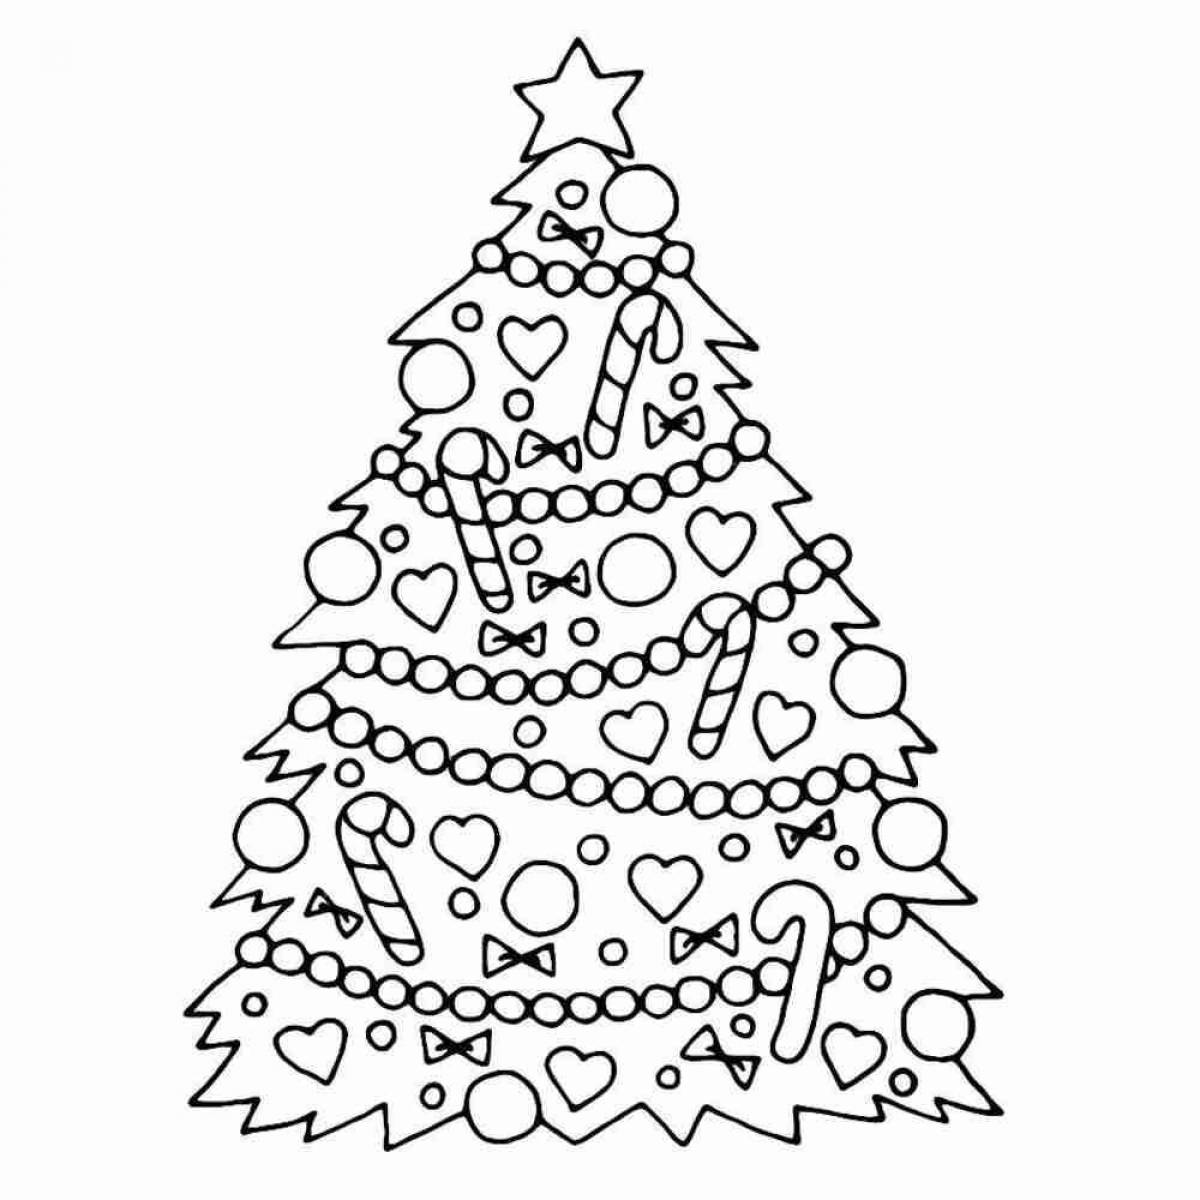 Colourful Christmas tree coloring book